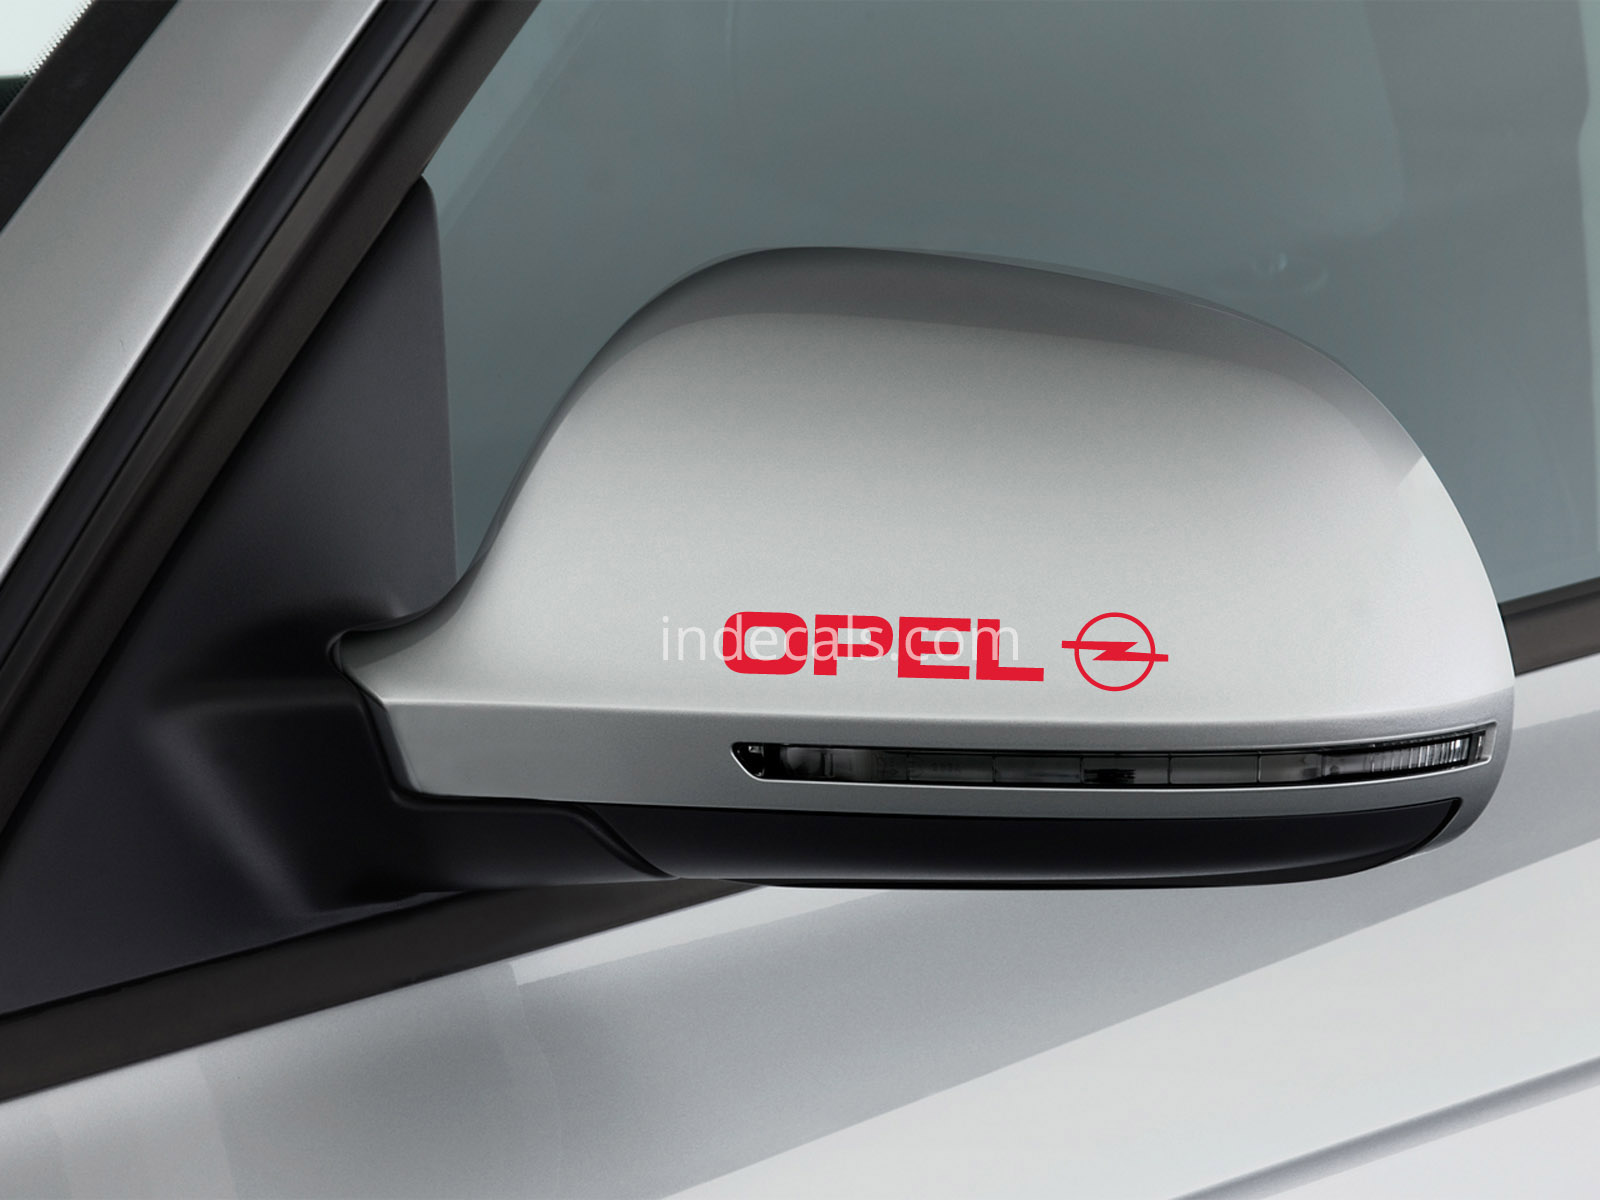 3 x Opel Stickers for Mirrors - Red